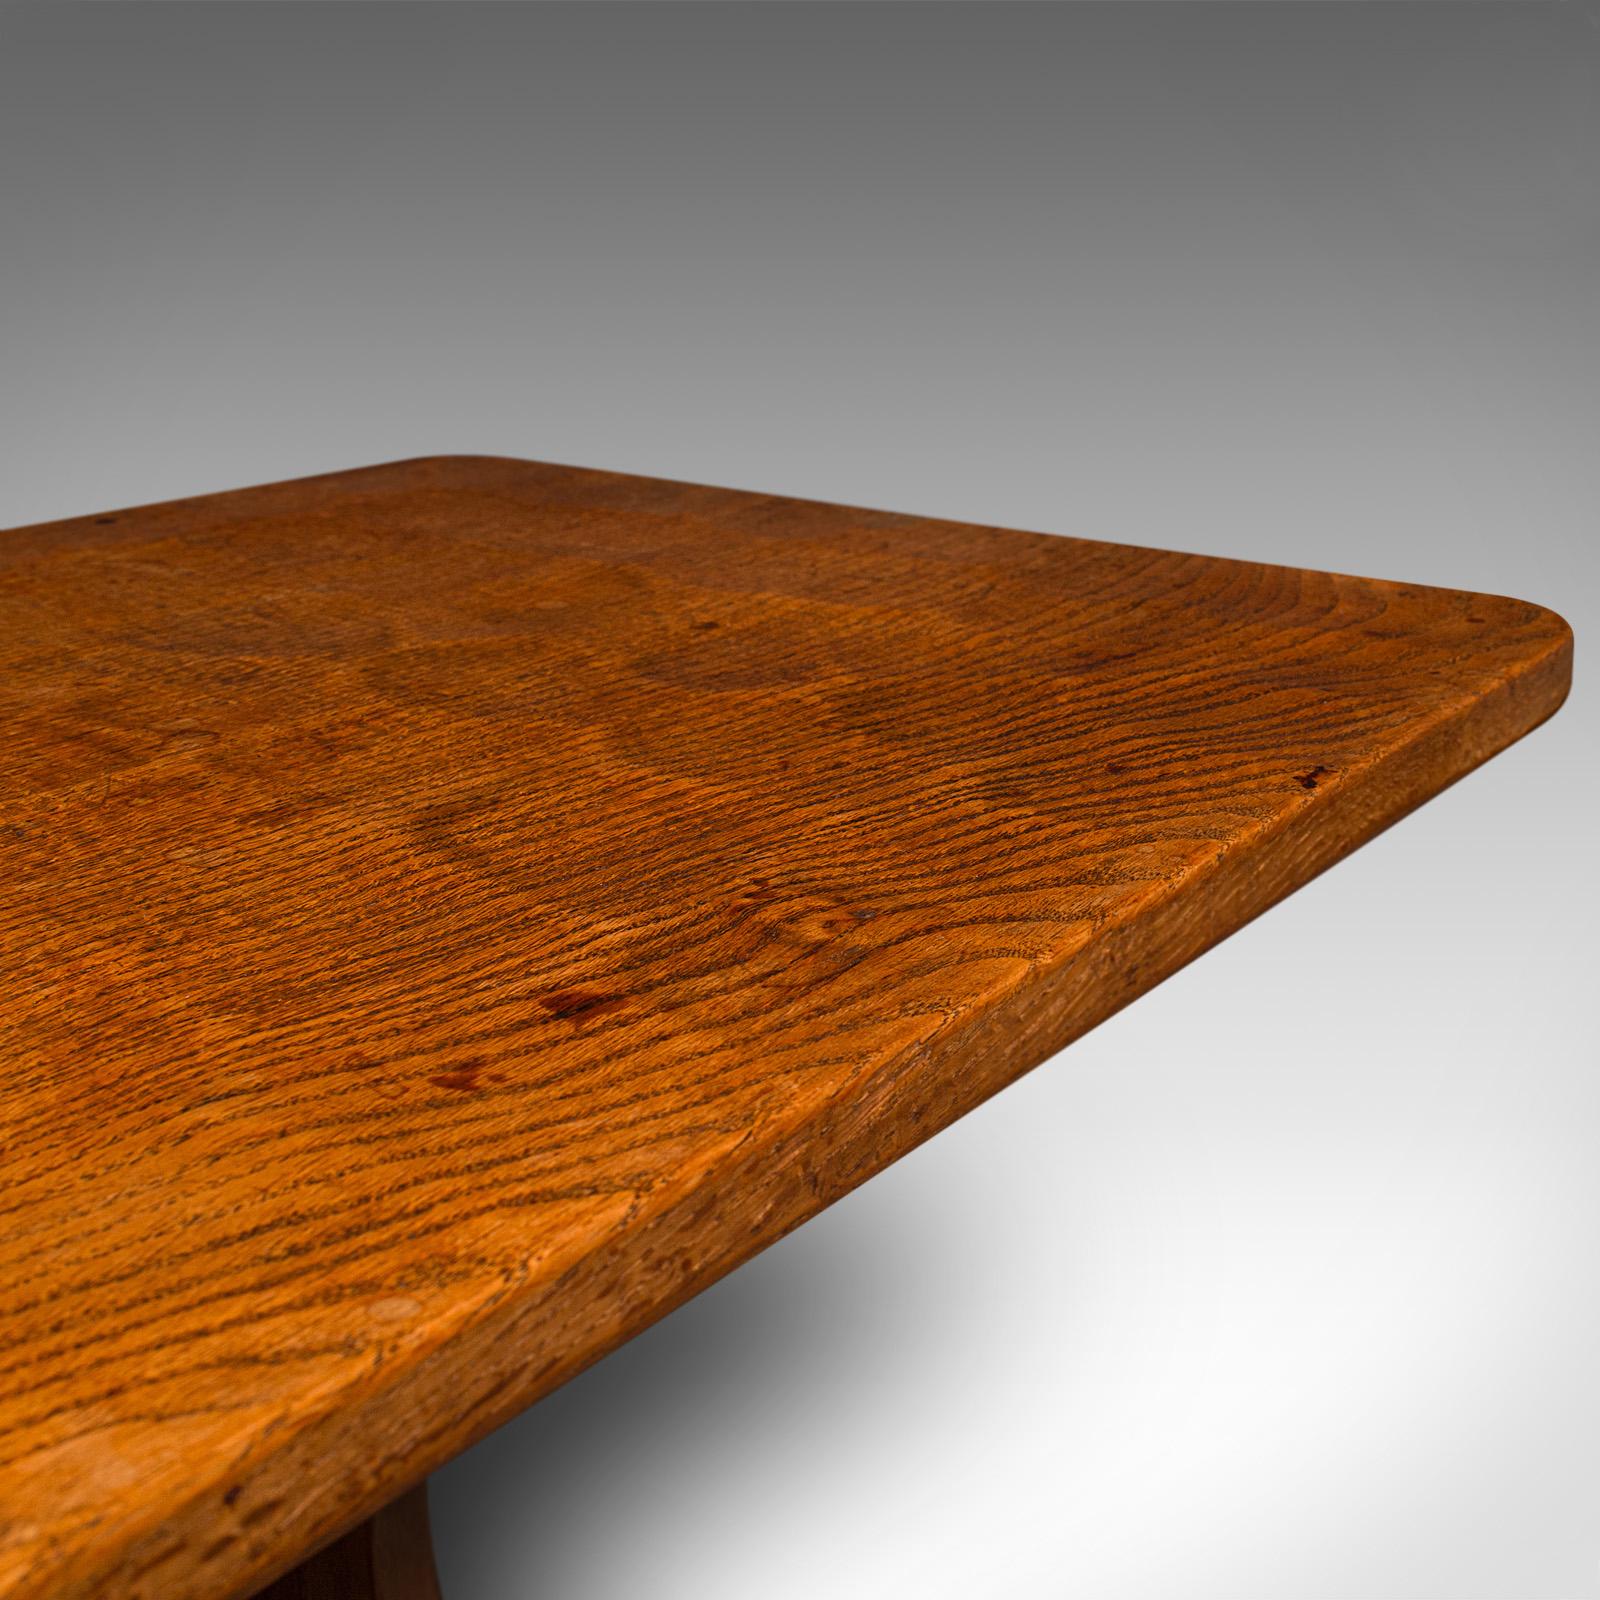 Vintage Coffee Table, English Oak, Cotswold School, After Mouseman, 20th Century For Sale 2